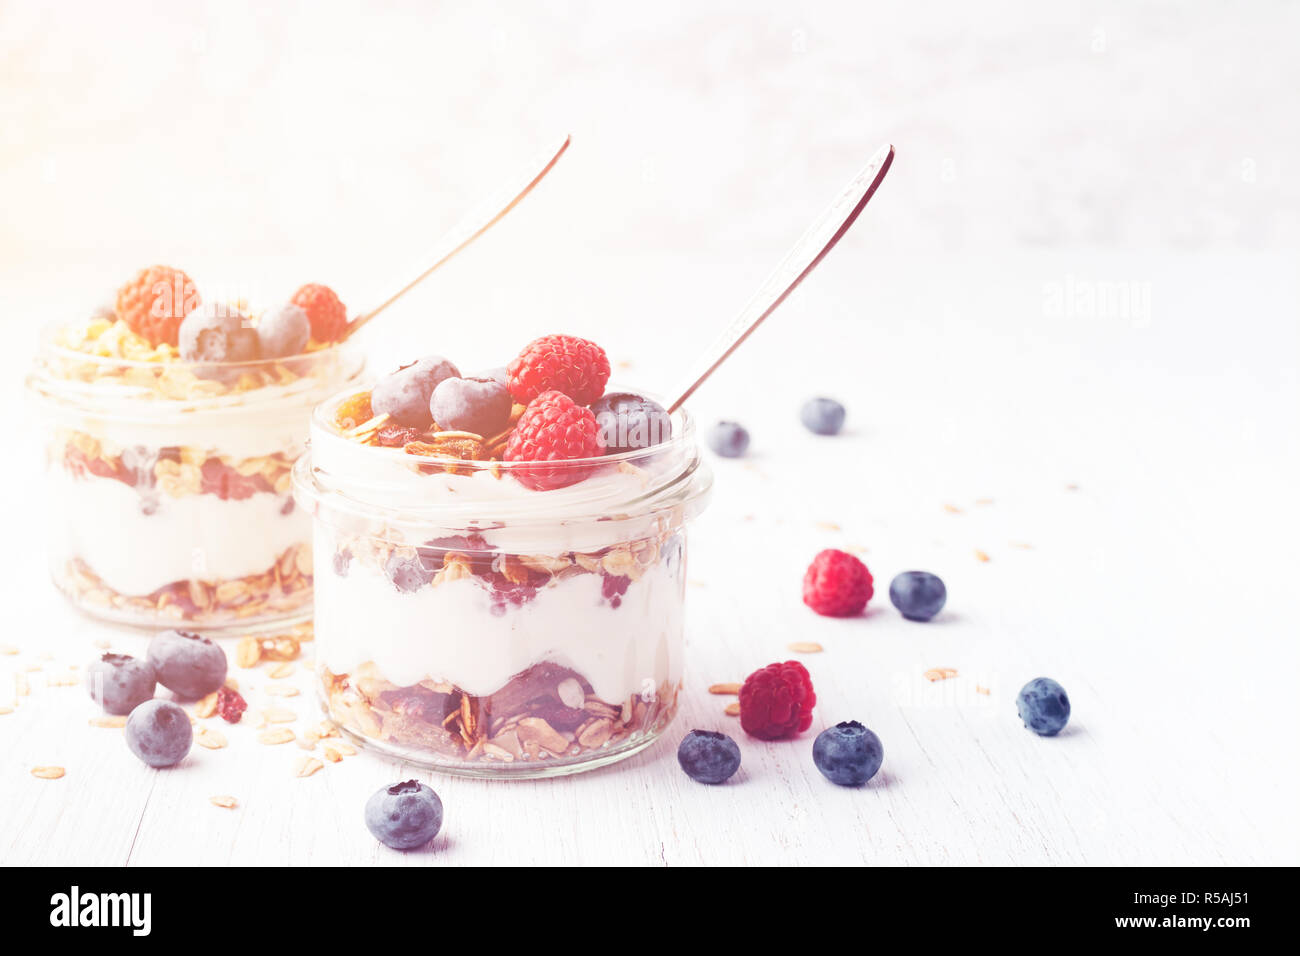 Two jars with tasty parfait made of granola, berries and yogurt on white wooden table. Shot at angle. Toned image with copy space. Stock Photo